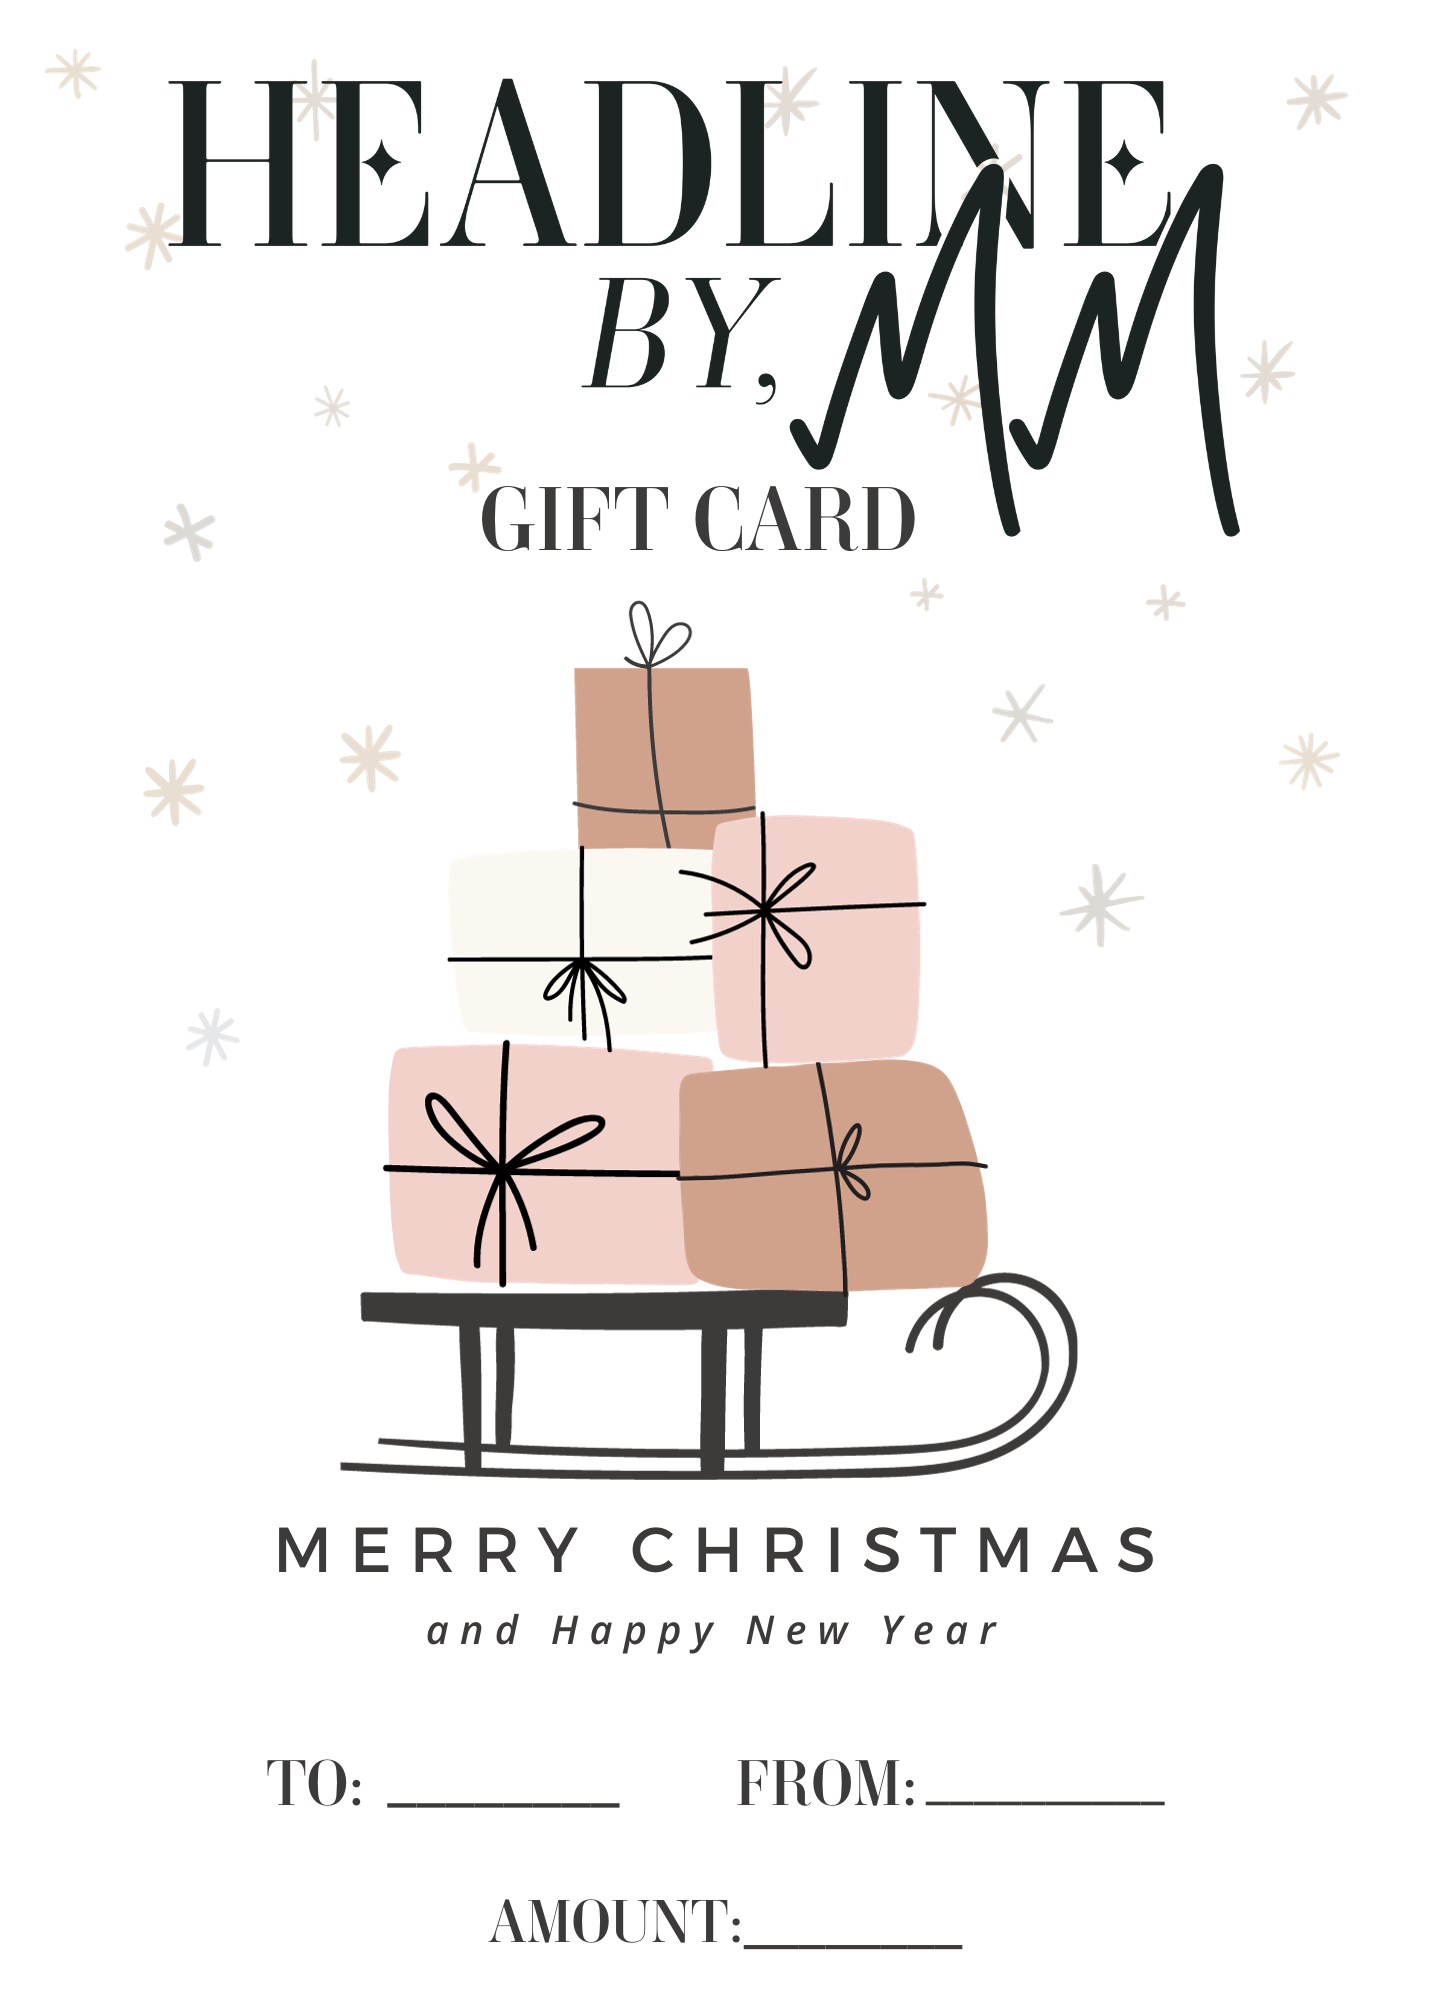 Headline by MM Gift Card